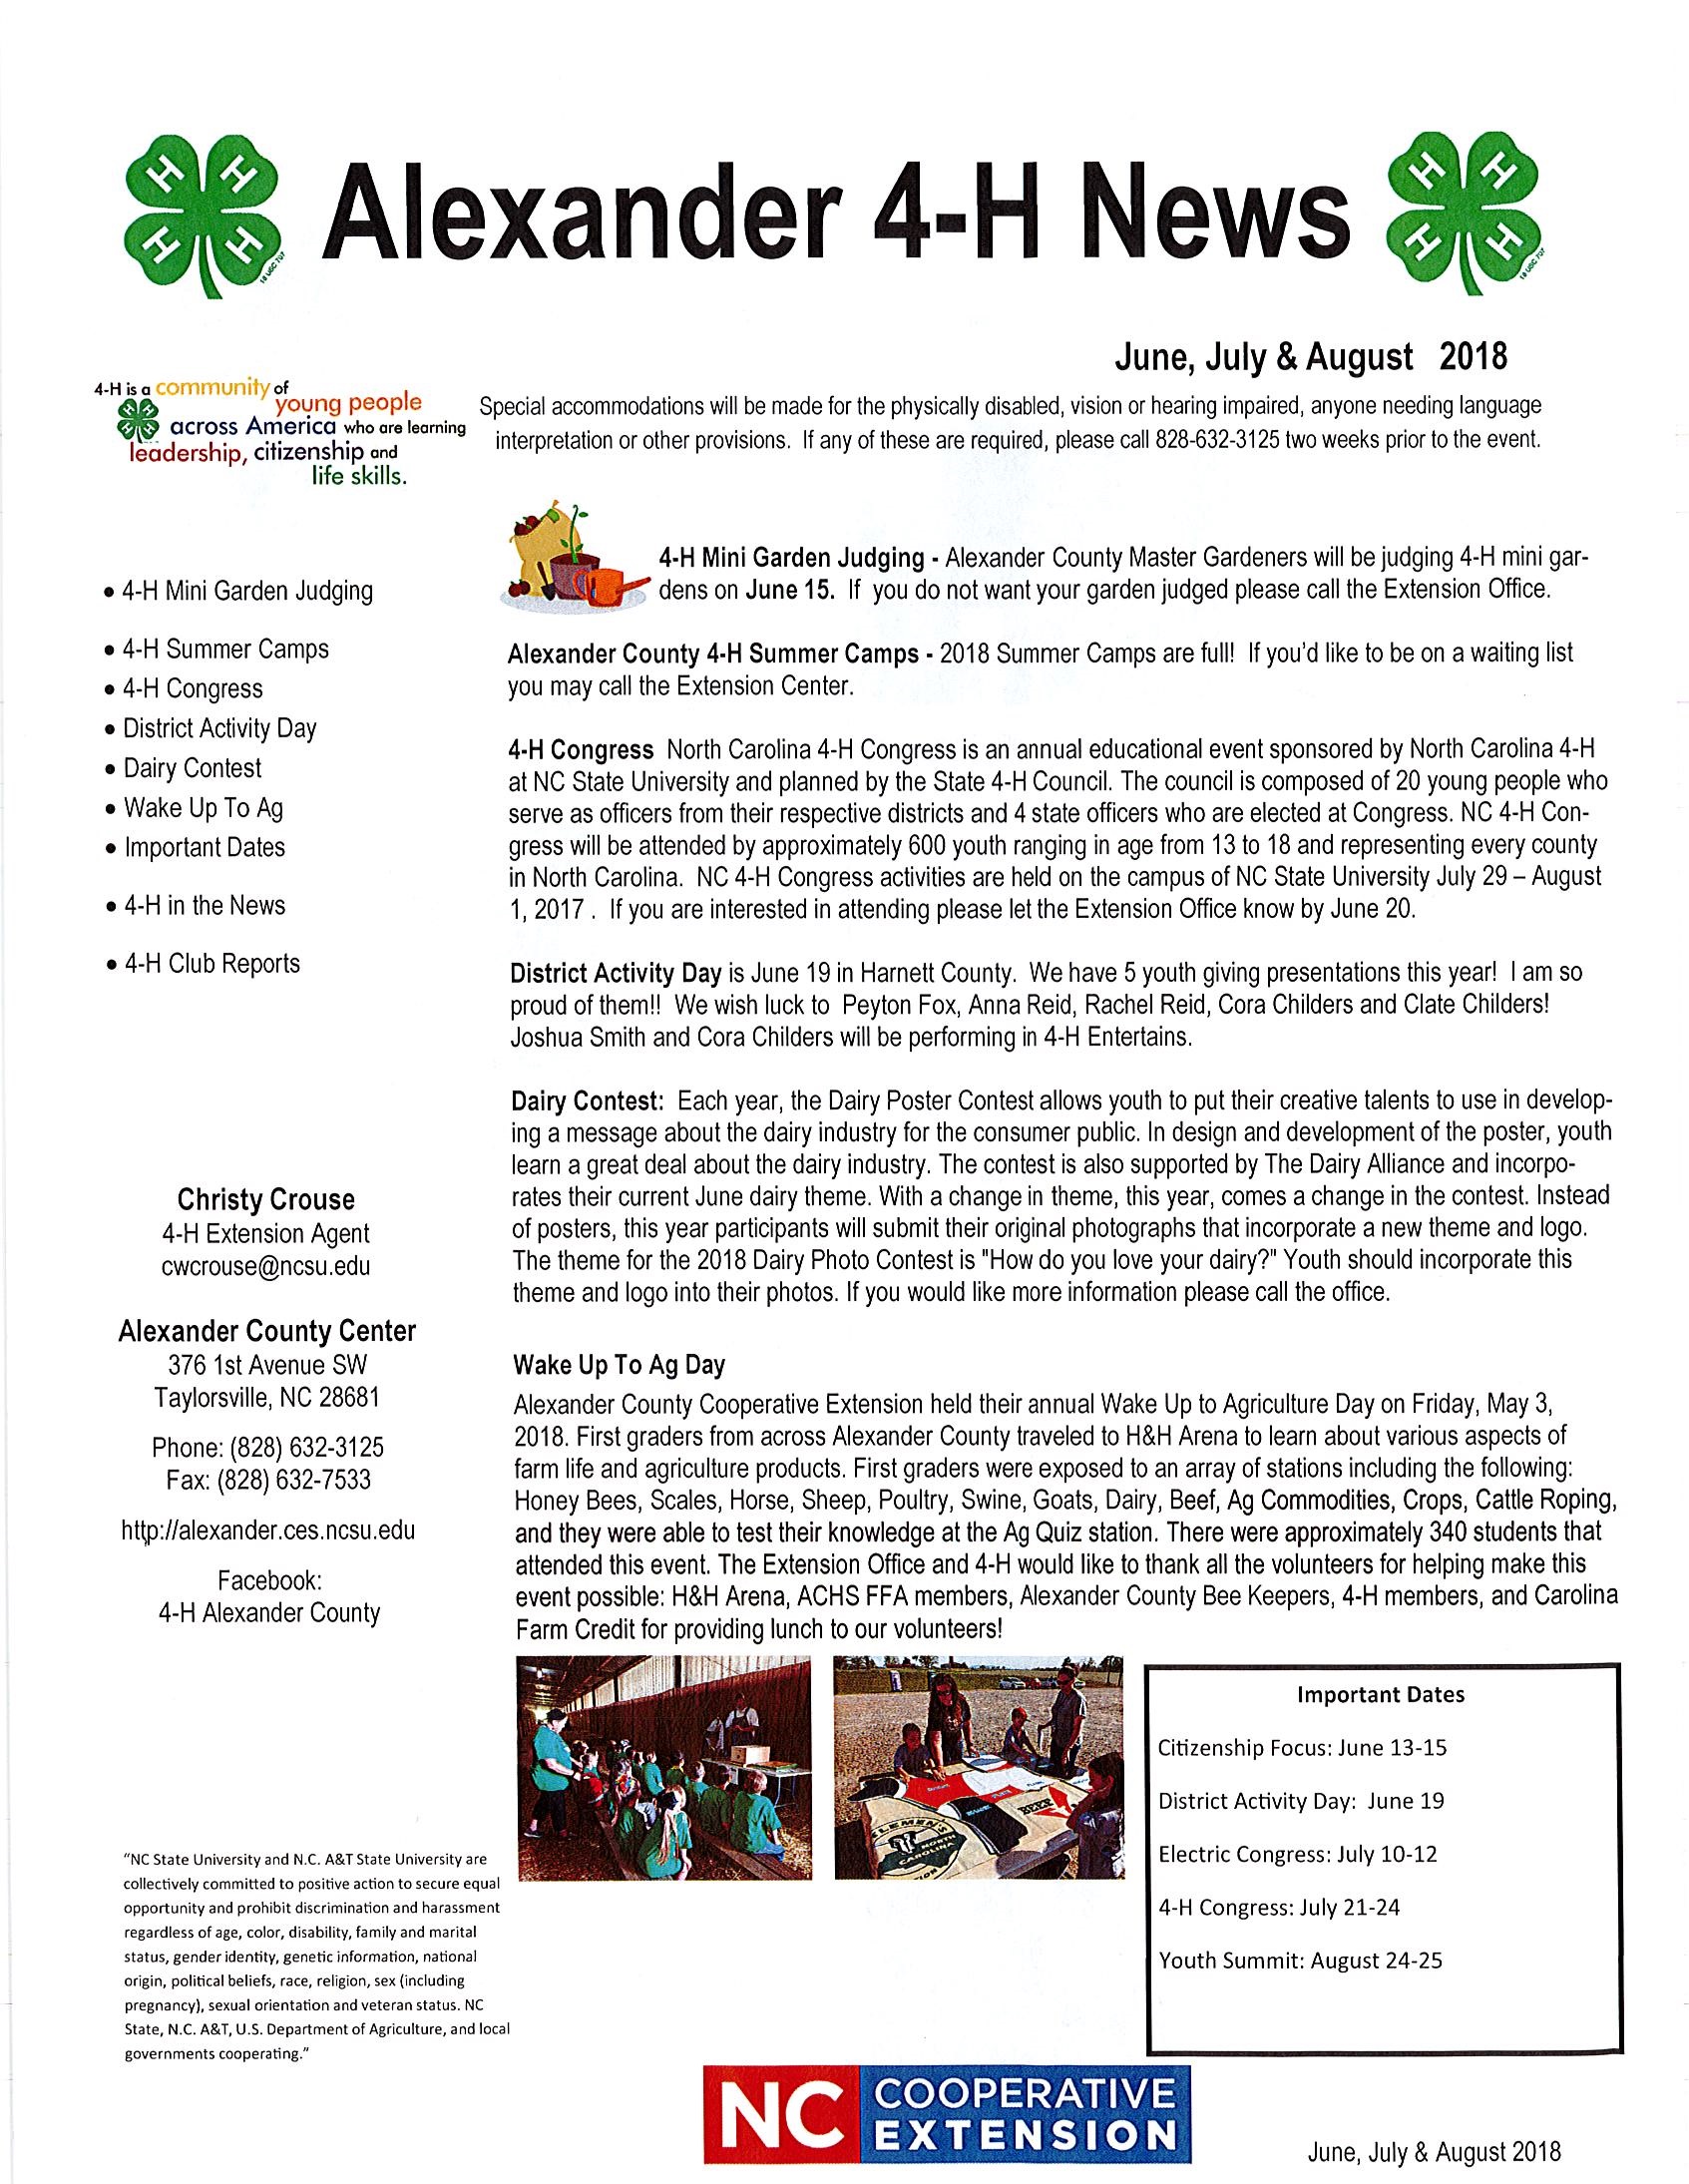 Newsletter page 1 image